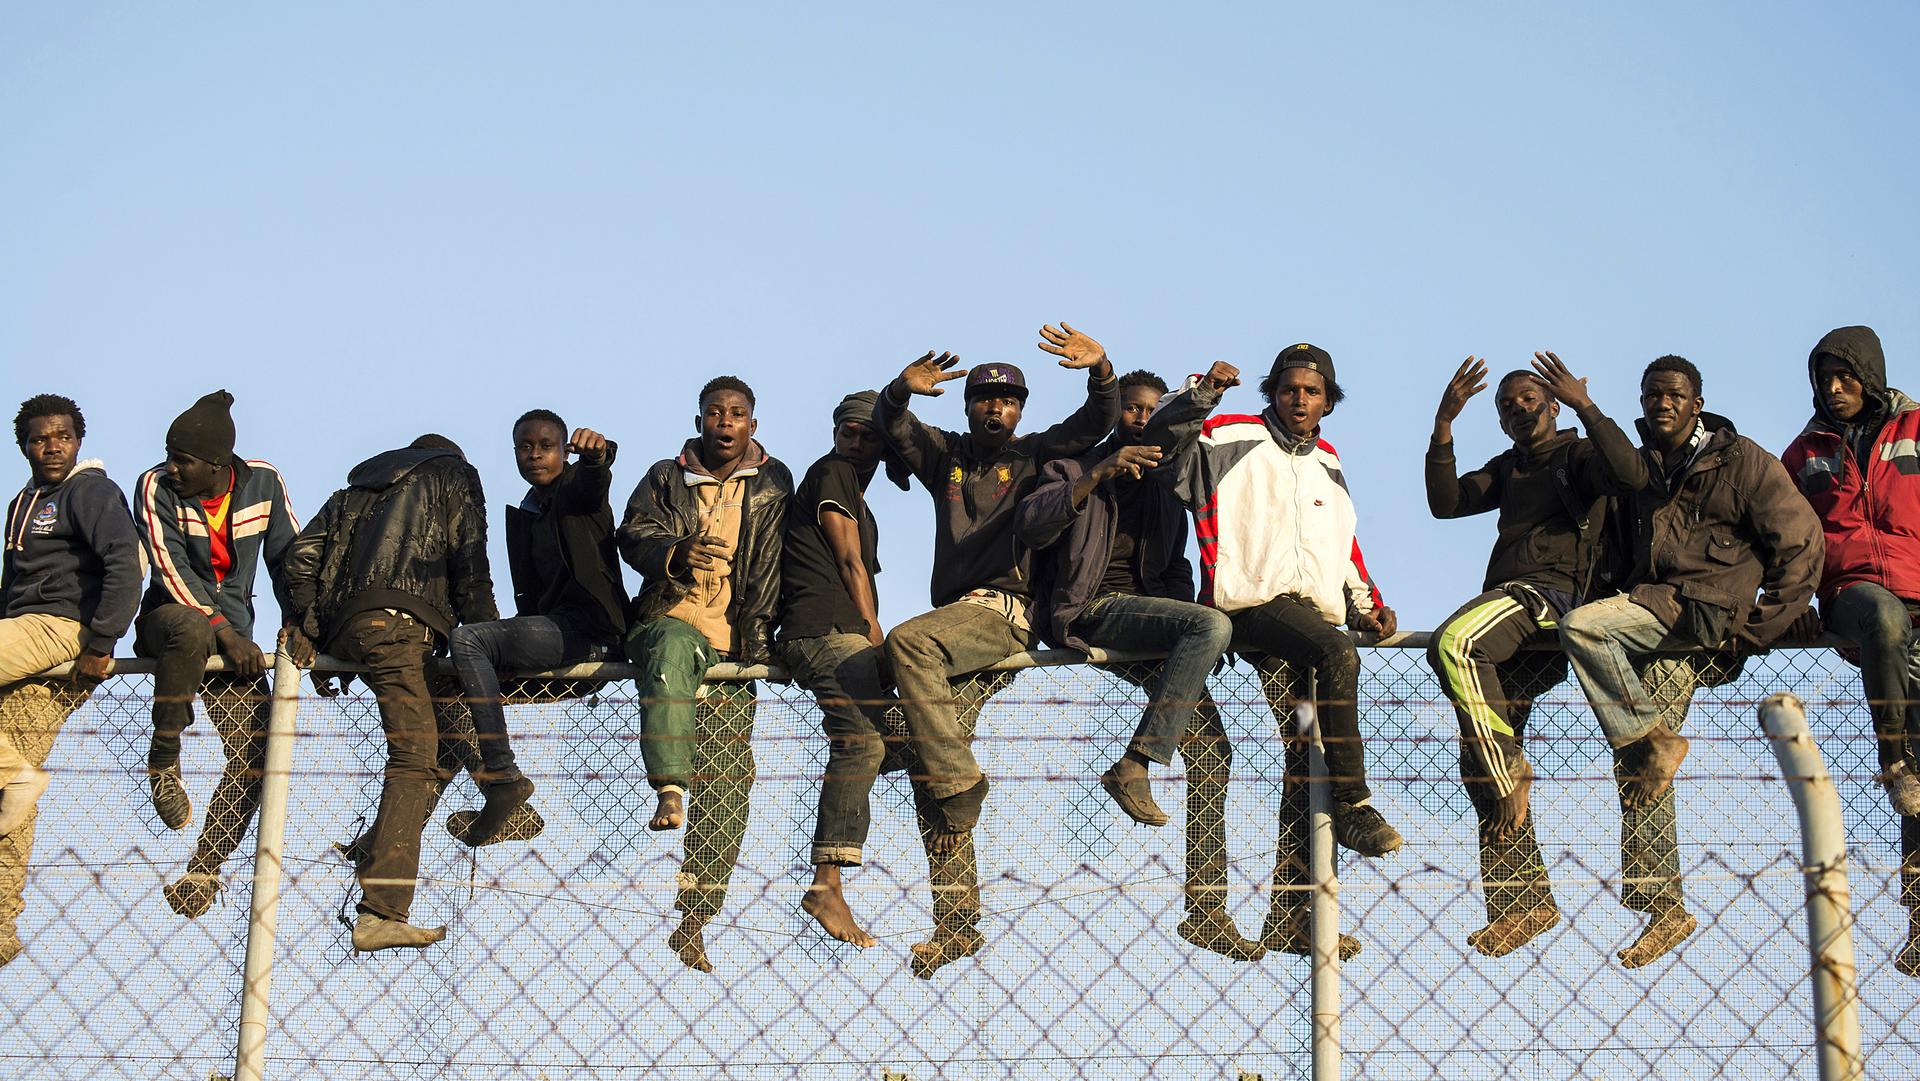 African migrants sit atop a border fence during an attempt to cross into Spanish territories, between Morocco and Spain's north African enclave of Melilla, Oct. 22, 2014.